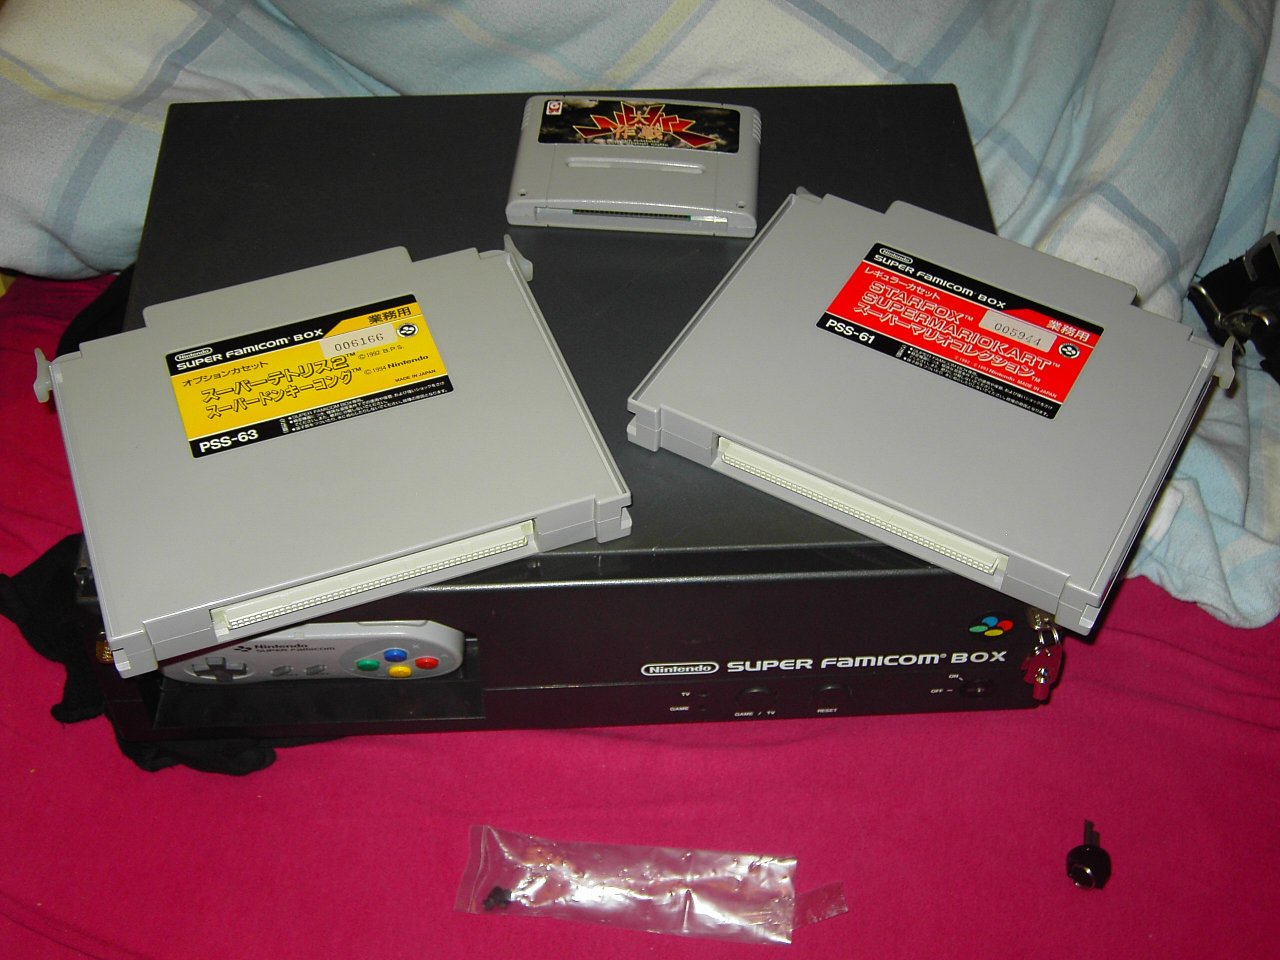 Super Famicom Box with two special carts